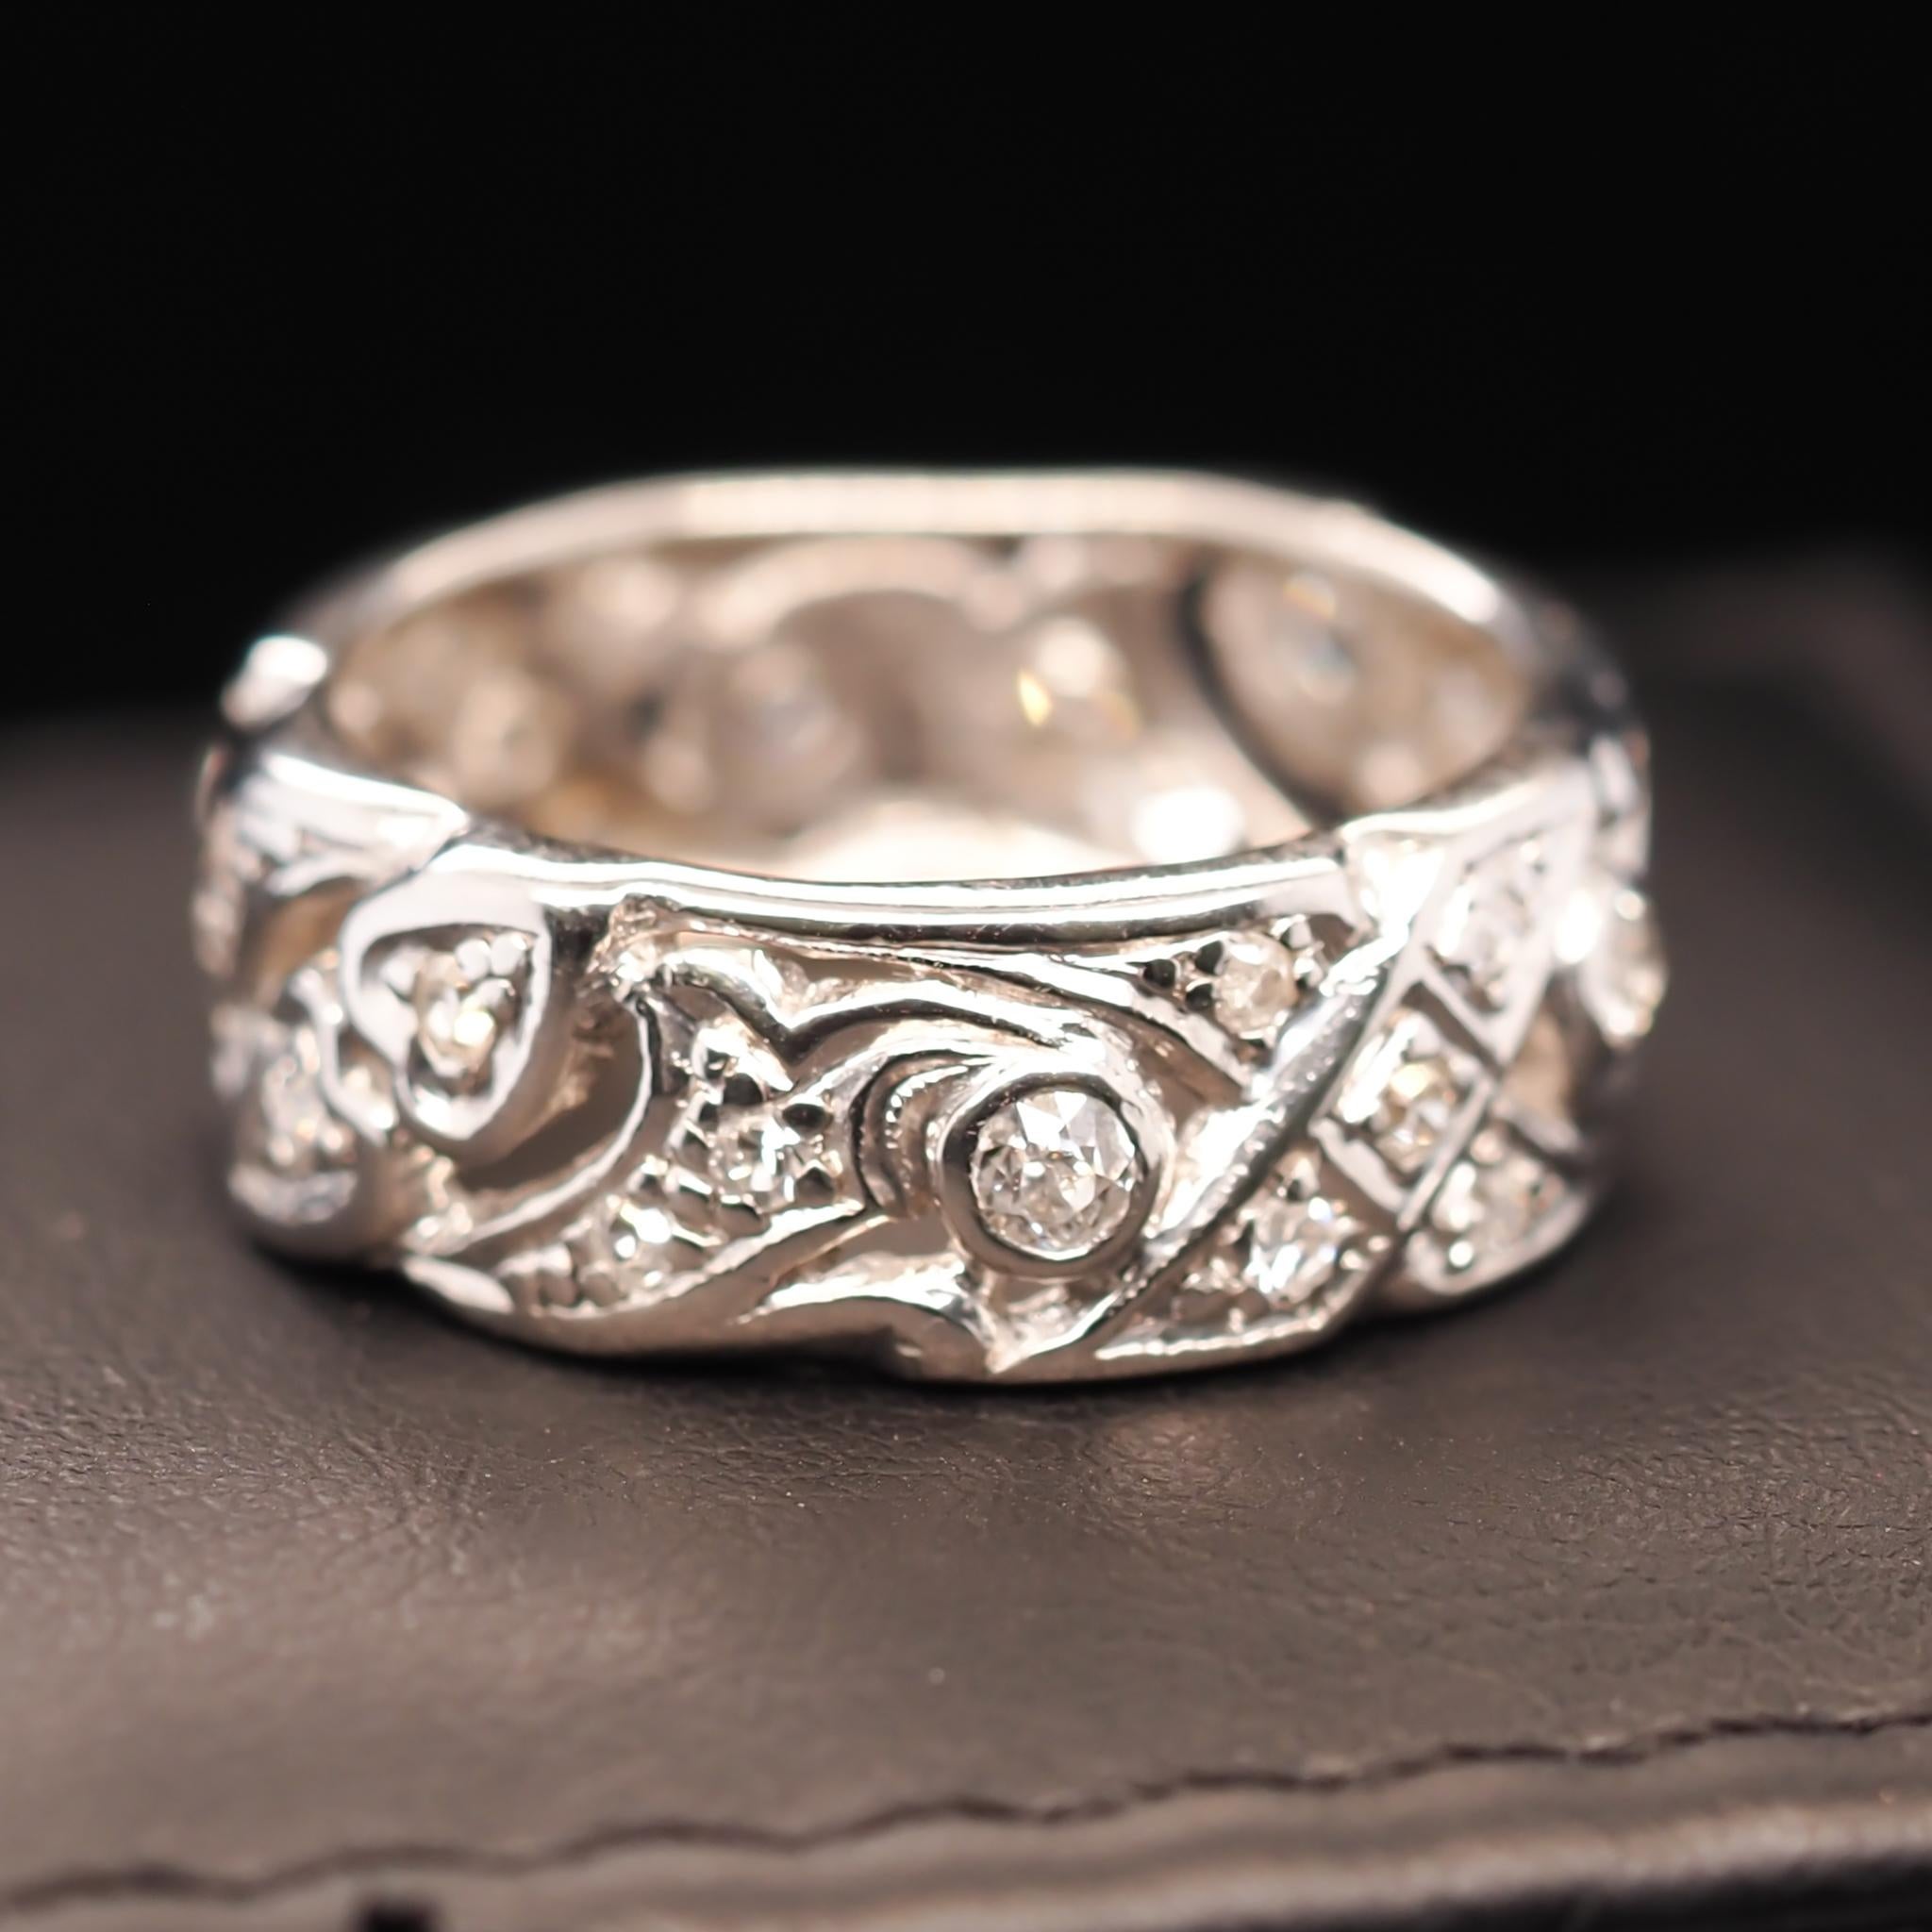 Year: 1940s

Item Details:
Ring Size: 7
Metal Type: Platinum [Hallmarked, and Tested]
Weight: 8.8 grams

Diamond Details: .50ct total weight, G-H Color, SI/I Clarity, Natural Diamonds,European Cut.

Band Width: 7.3 mm
Condition: Excellent
